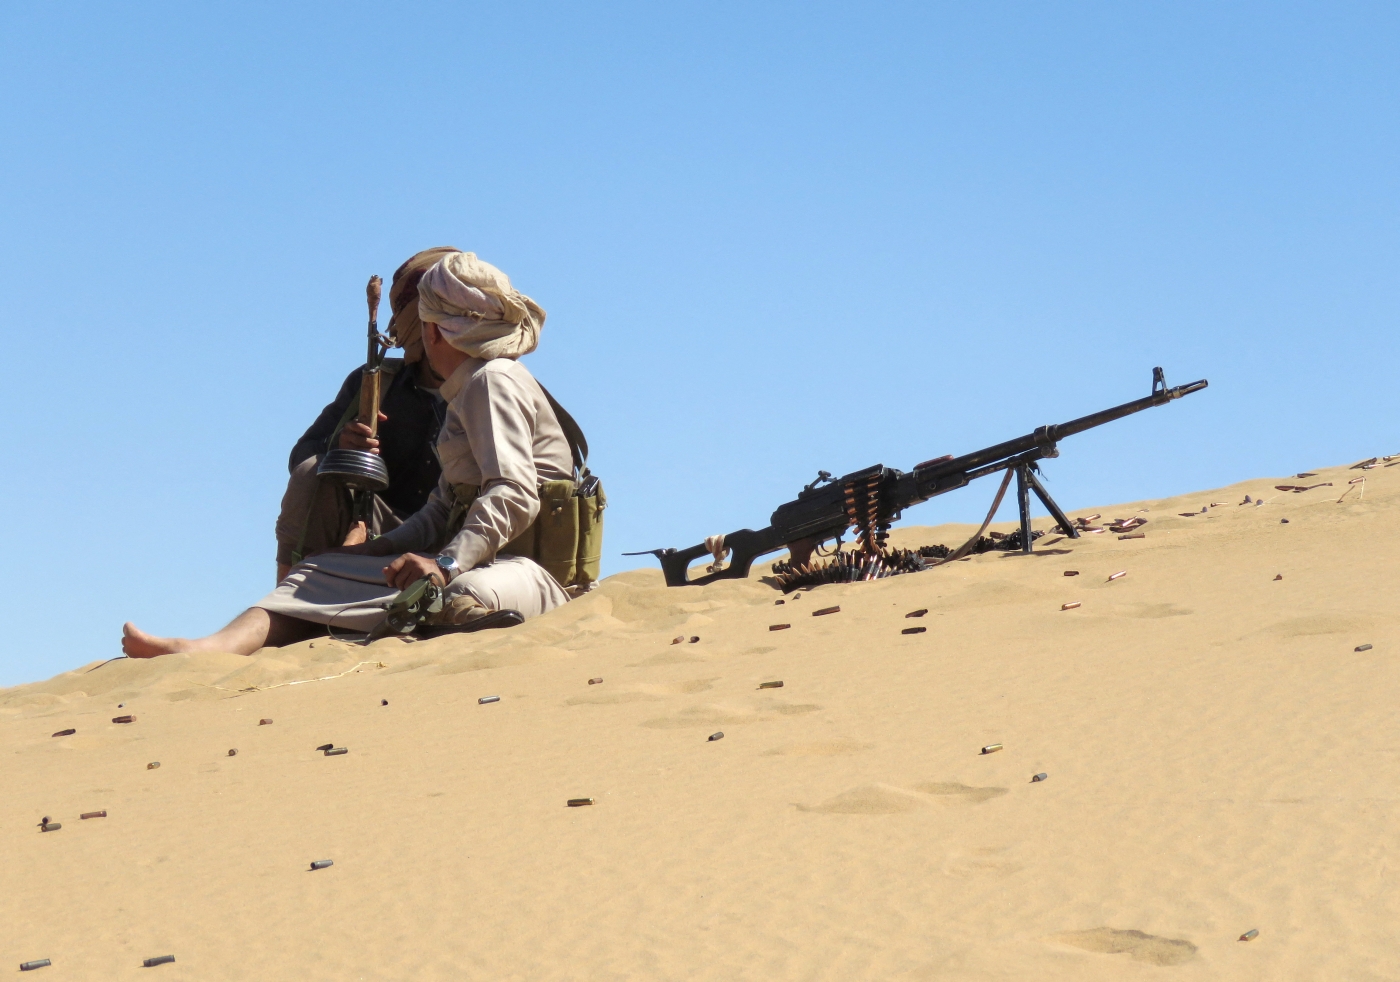 Yemeni pro-government fighters man their position during fighting with Houthi rebels on the al-Jawba frontline south of Marib on 7 December 2021.